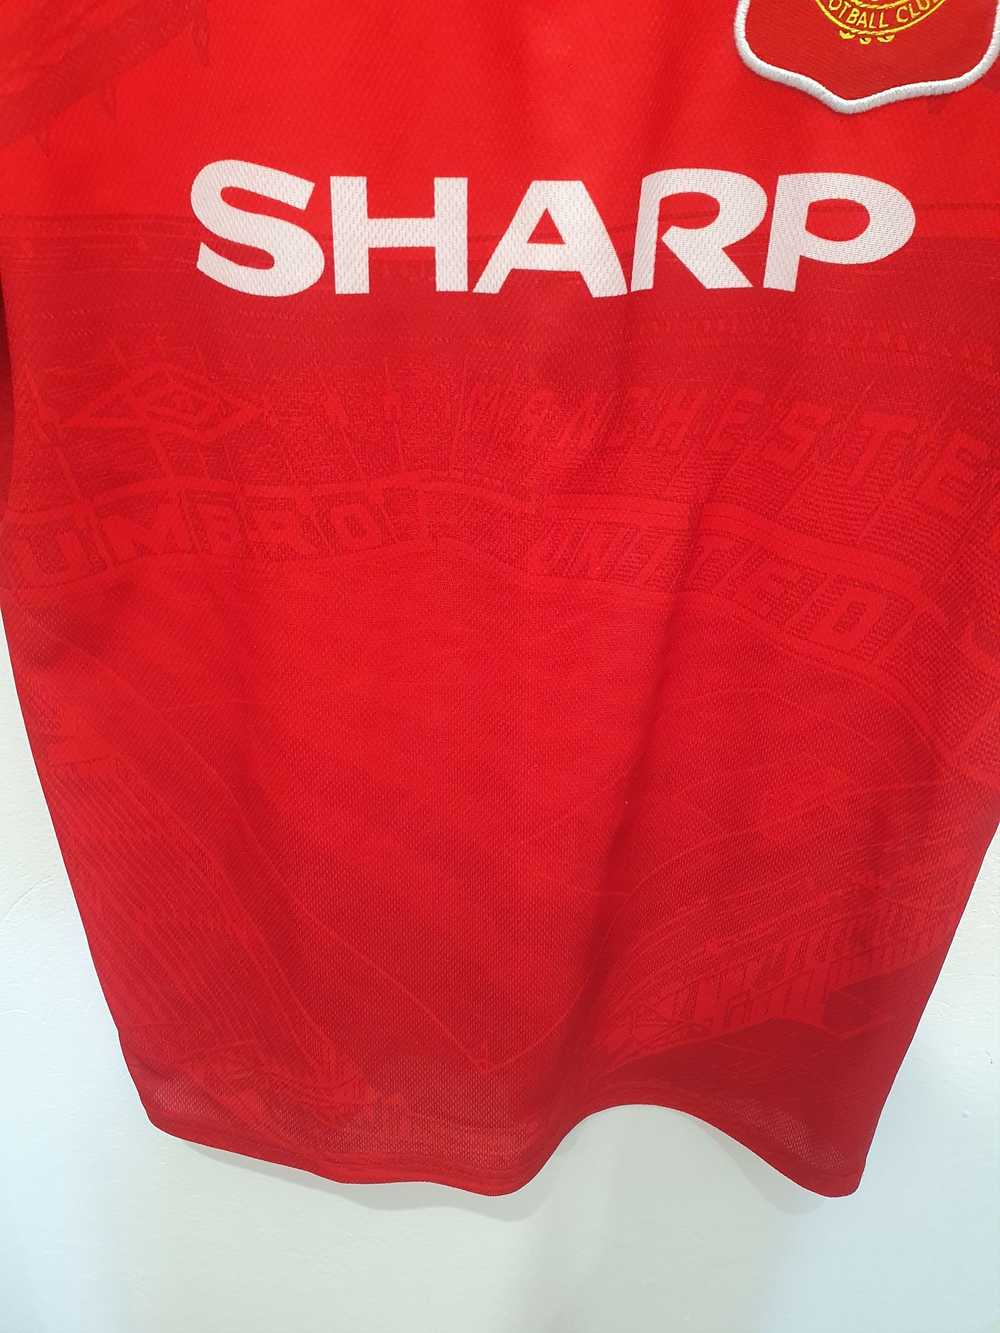 Jersey × Manchester United × Soccer Jersey MANCHE… - image 5